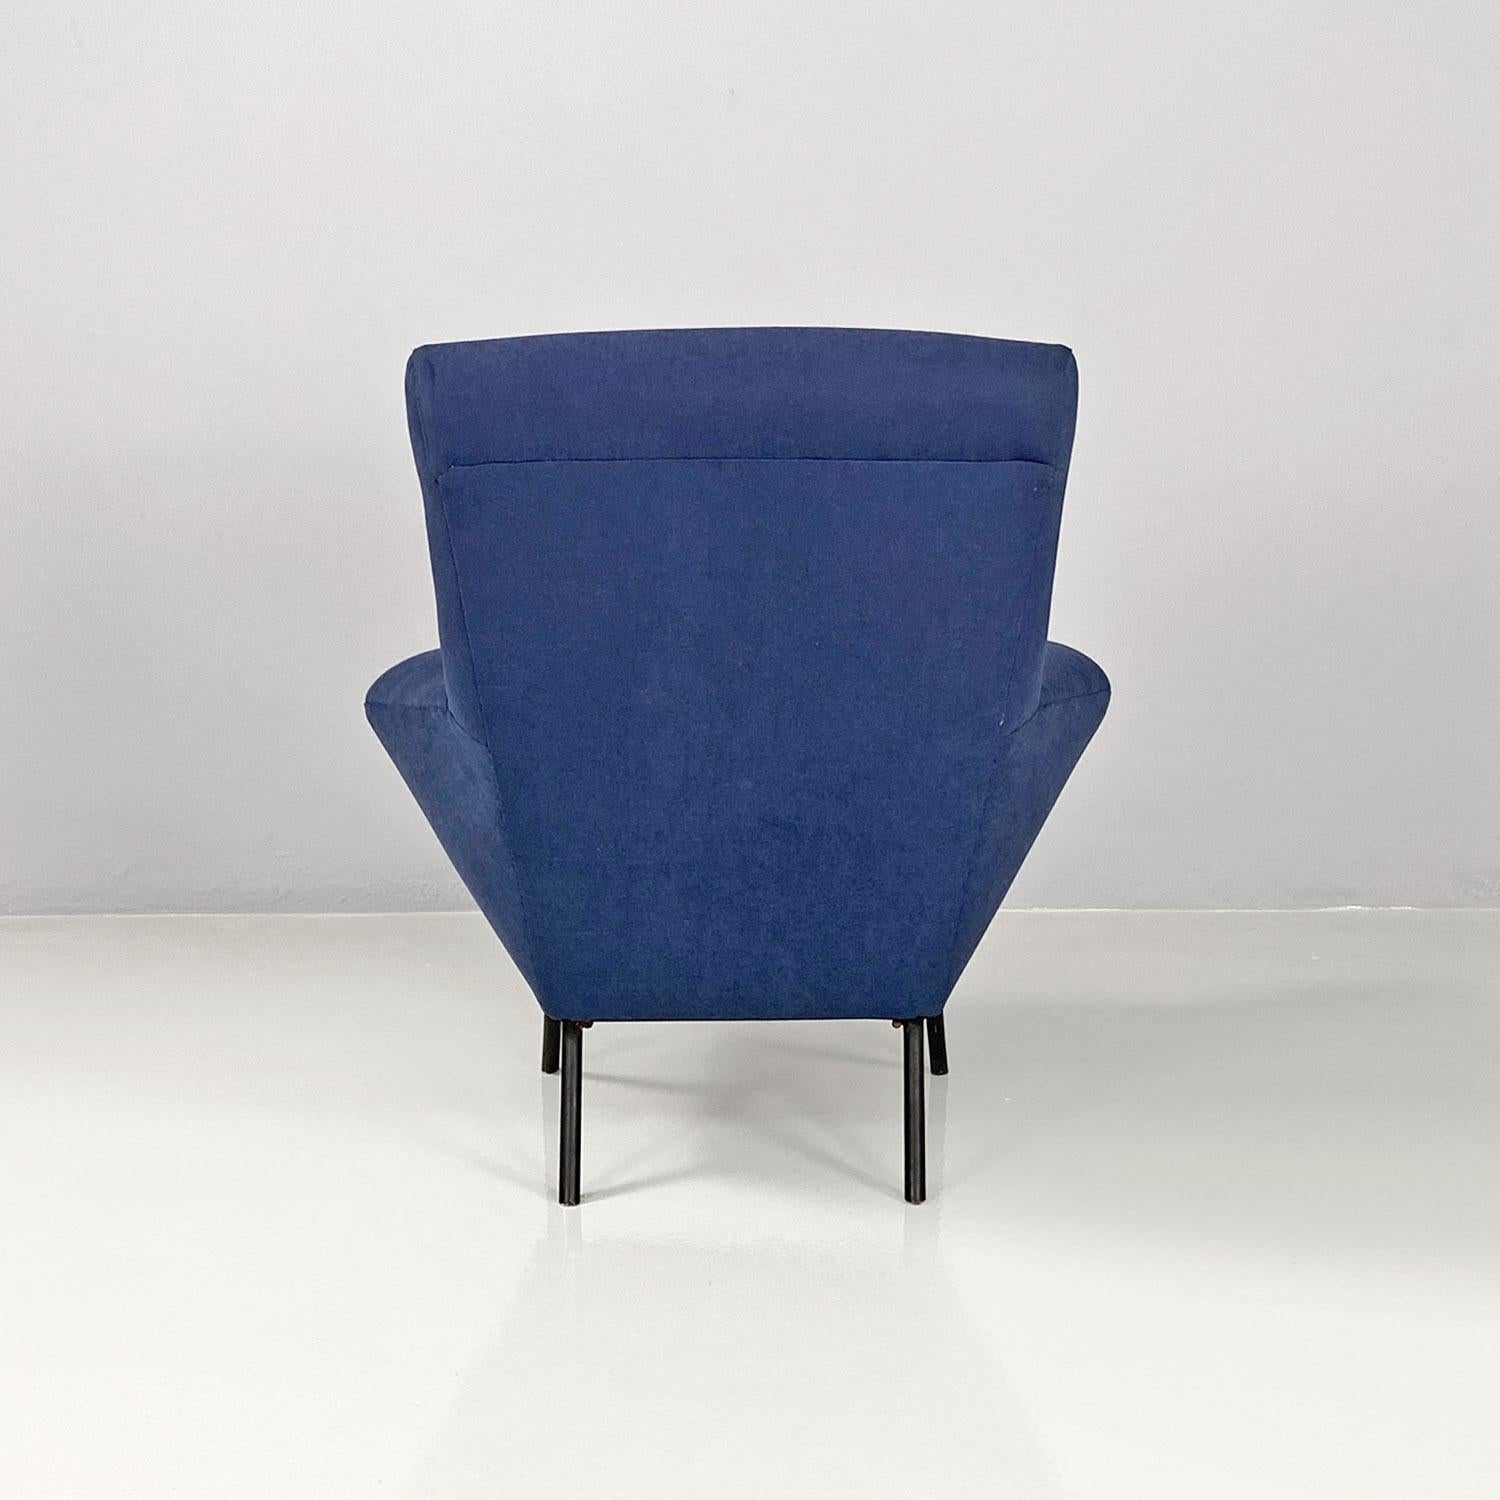 Italian mid-century modern blue fabric and black metal armchairs, 1960s For Sale 3